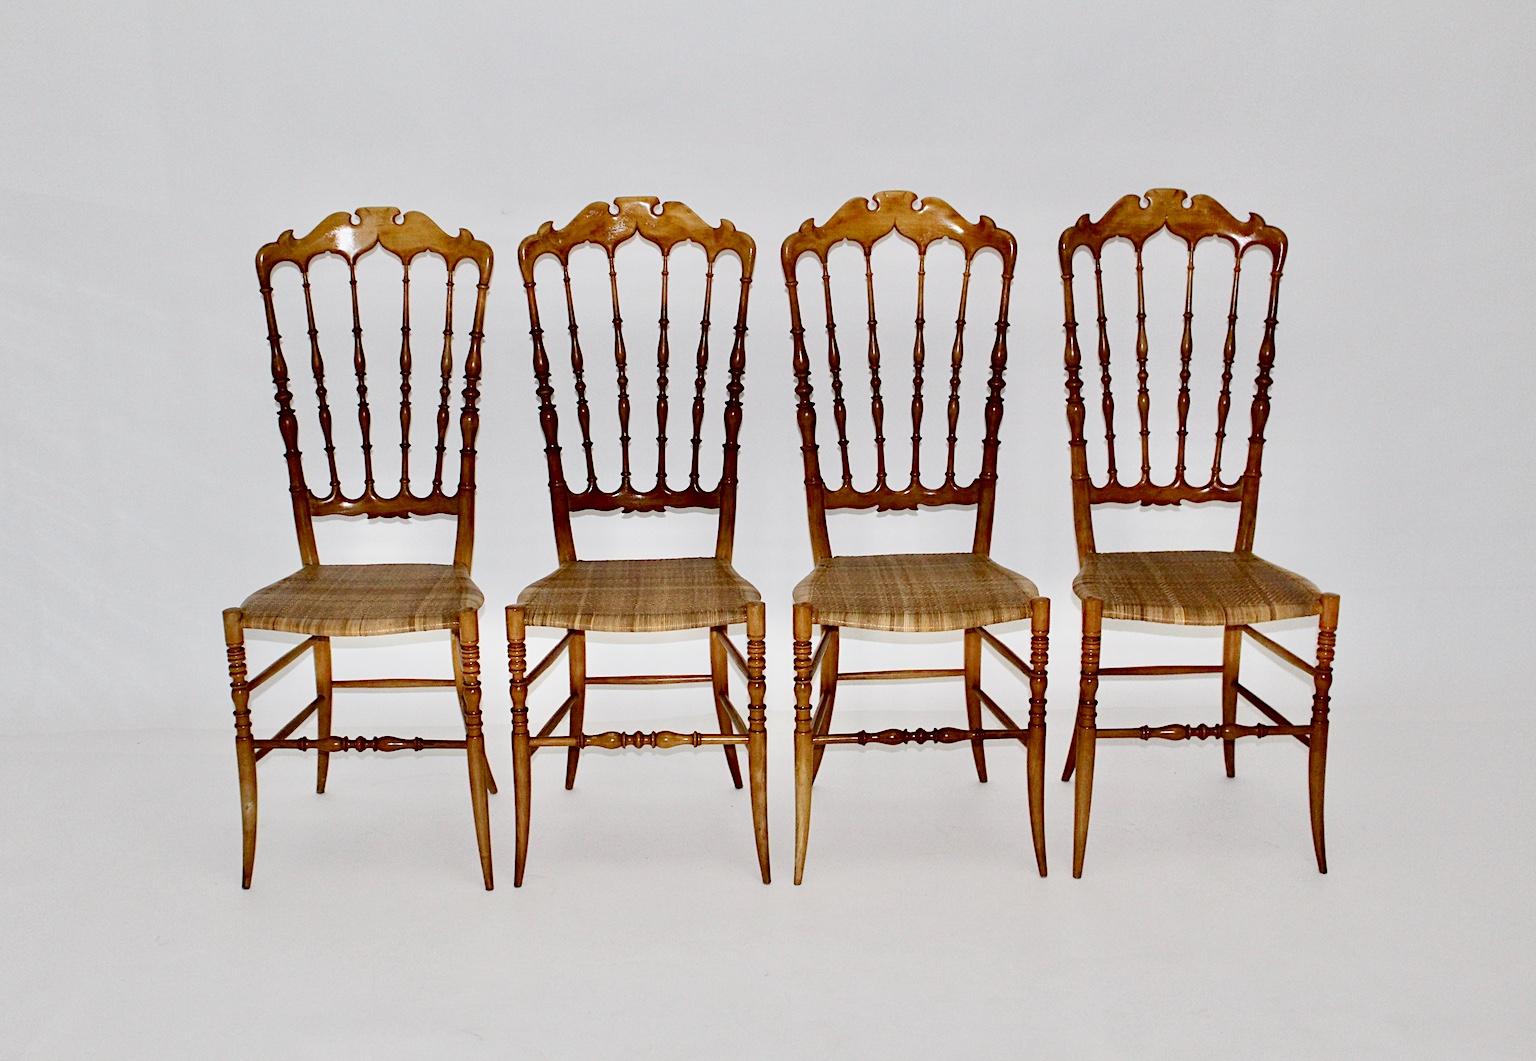 Mid Century Modern delightful set of 4 beech dining chairs / chairs with a high backrest was handmade in Italy by Chiavari, 1950s.
The four dining chairs feature a turned natural lacquered frame made of solid beech and furthermore a handmade cane